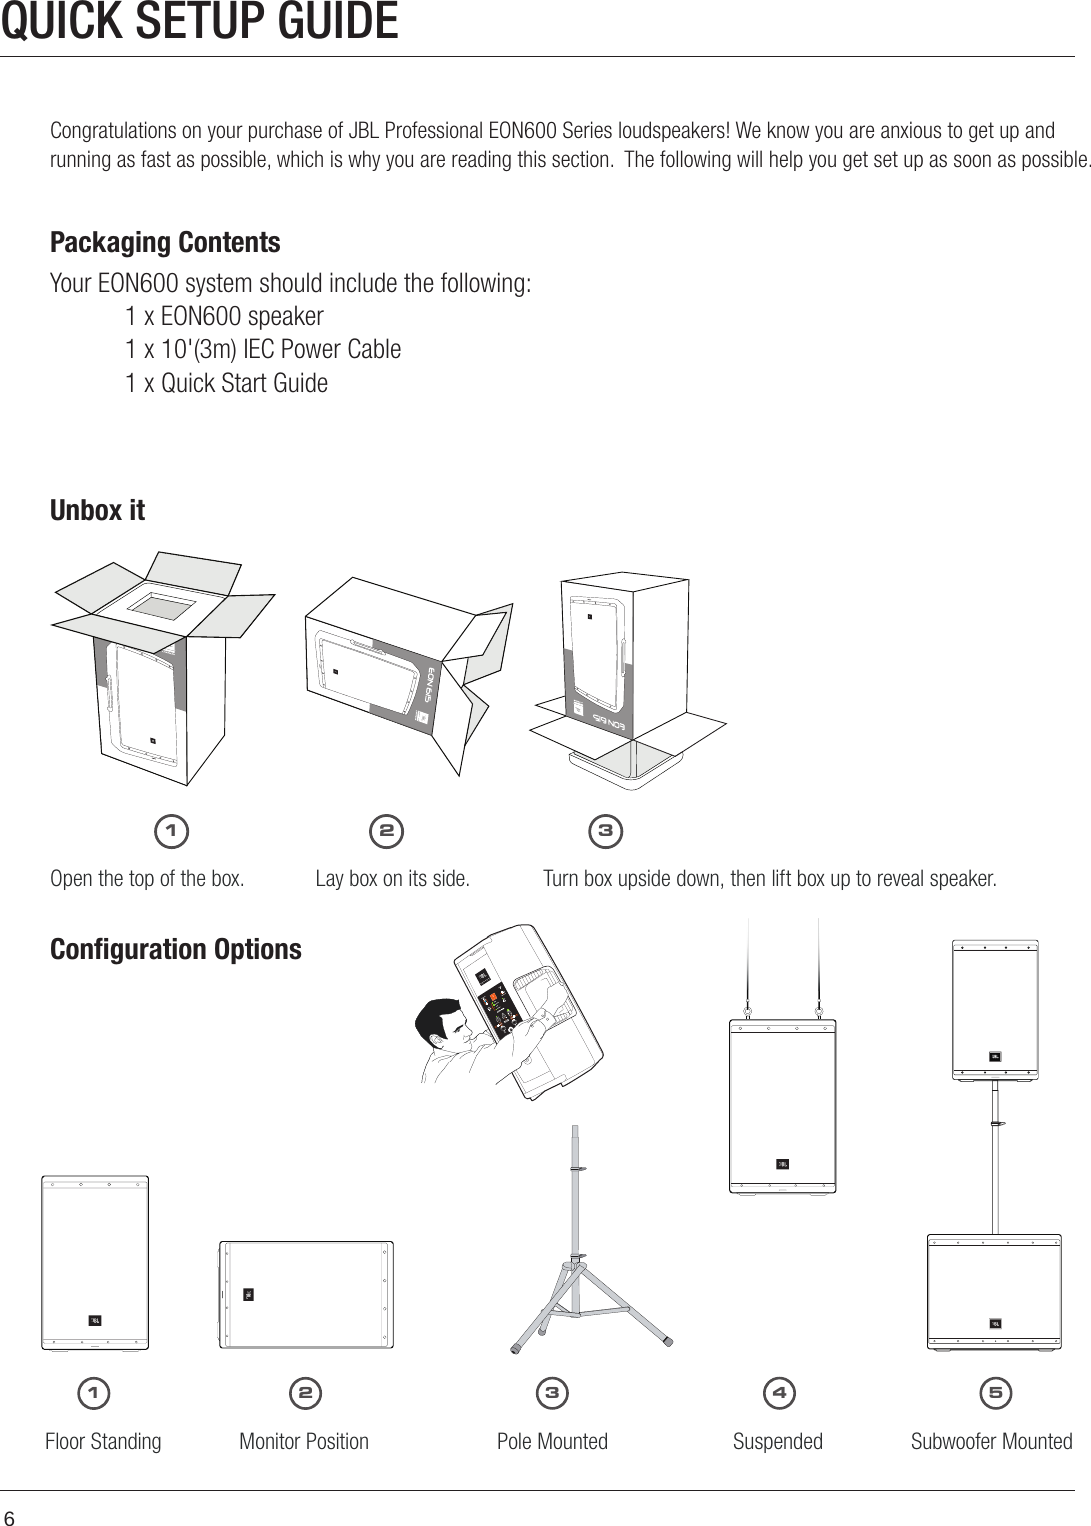 6QUICK SETUP GUIDECongratulations on your purchase of JBL Professional EON600 Series loudspeakers! We know you are anxious to get up and running as fast as possible, which is why you are reading this section.  The following will help you get set up as soon as possible. Packaging ContentsYour EON600 system should include the following:1 x EON600 speaker1 x 10&apos;(3m) IEC Power Cable1 x Quick Start GuideUnbox itOpen the top of the box. Turn box upside down, then lift box up to reveal speaker.Lay box on its side.Conﬁguration OptionsFloor Standing         Monitor Position               Pole Mounted                 Suspended                Subwoofer Mounted11223 4 53